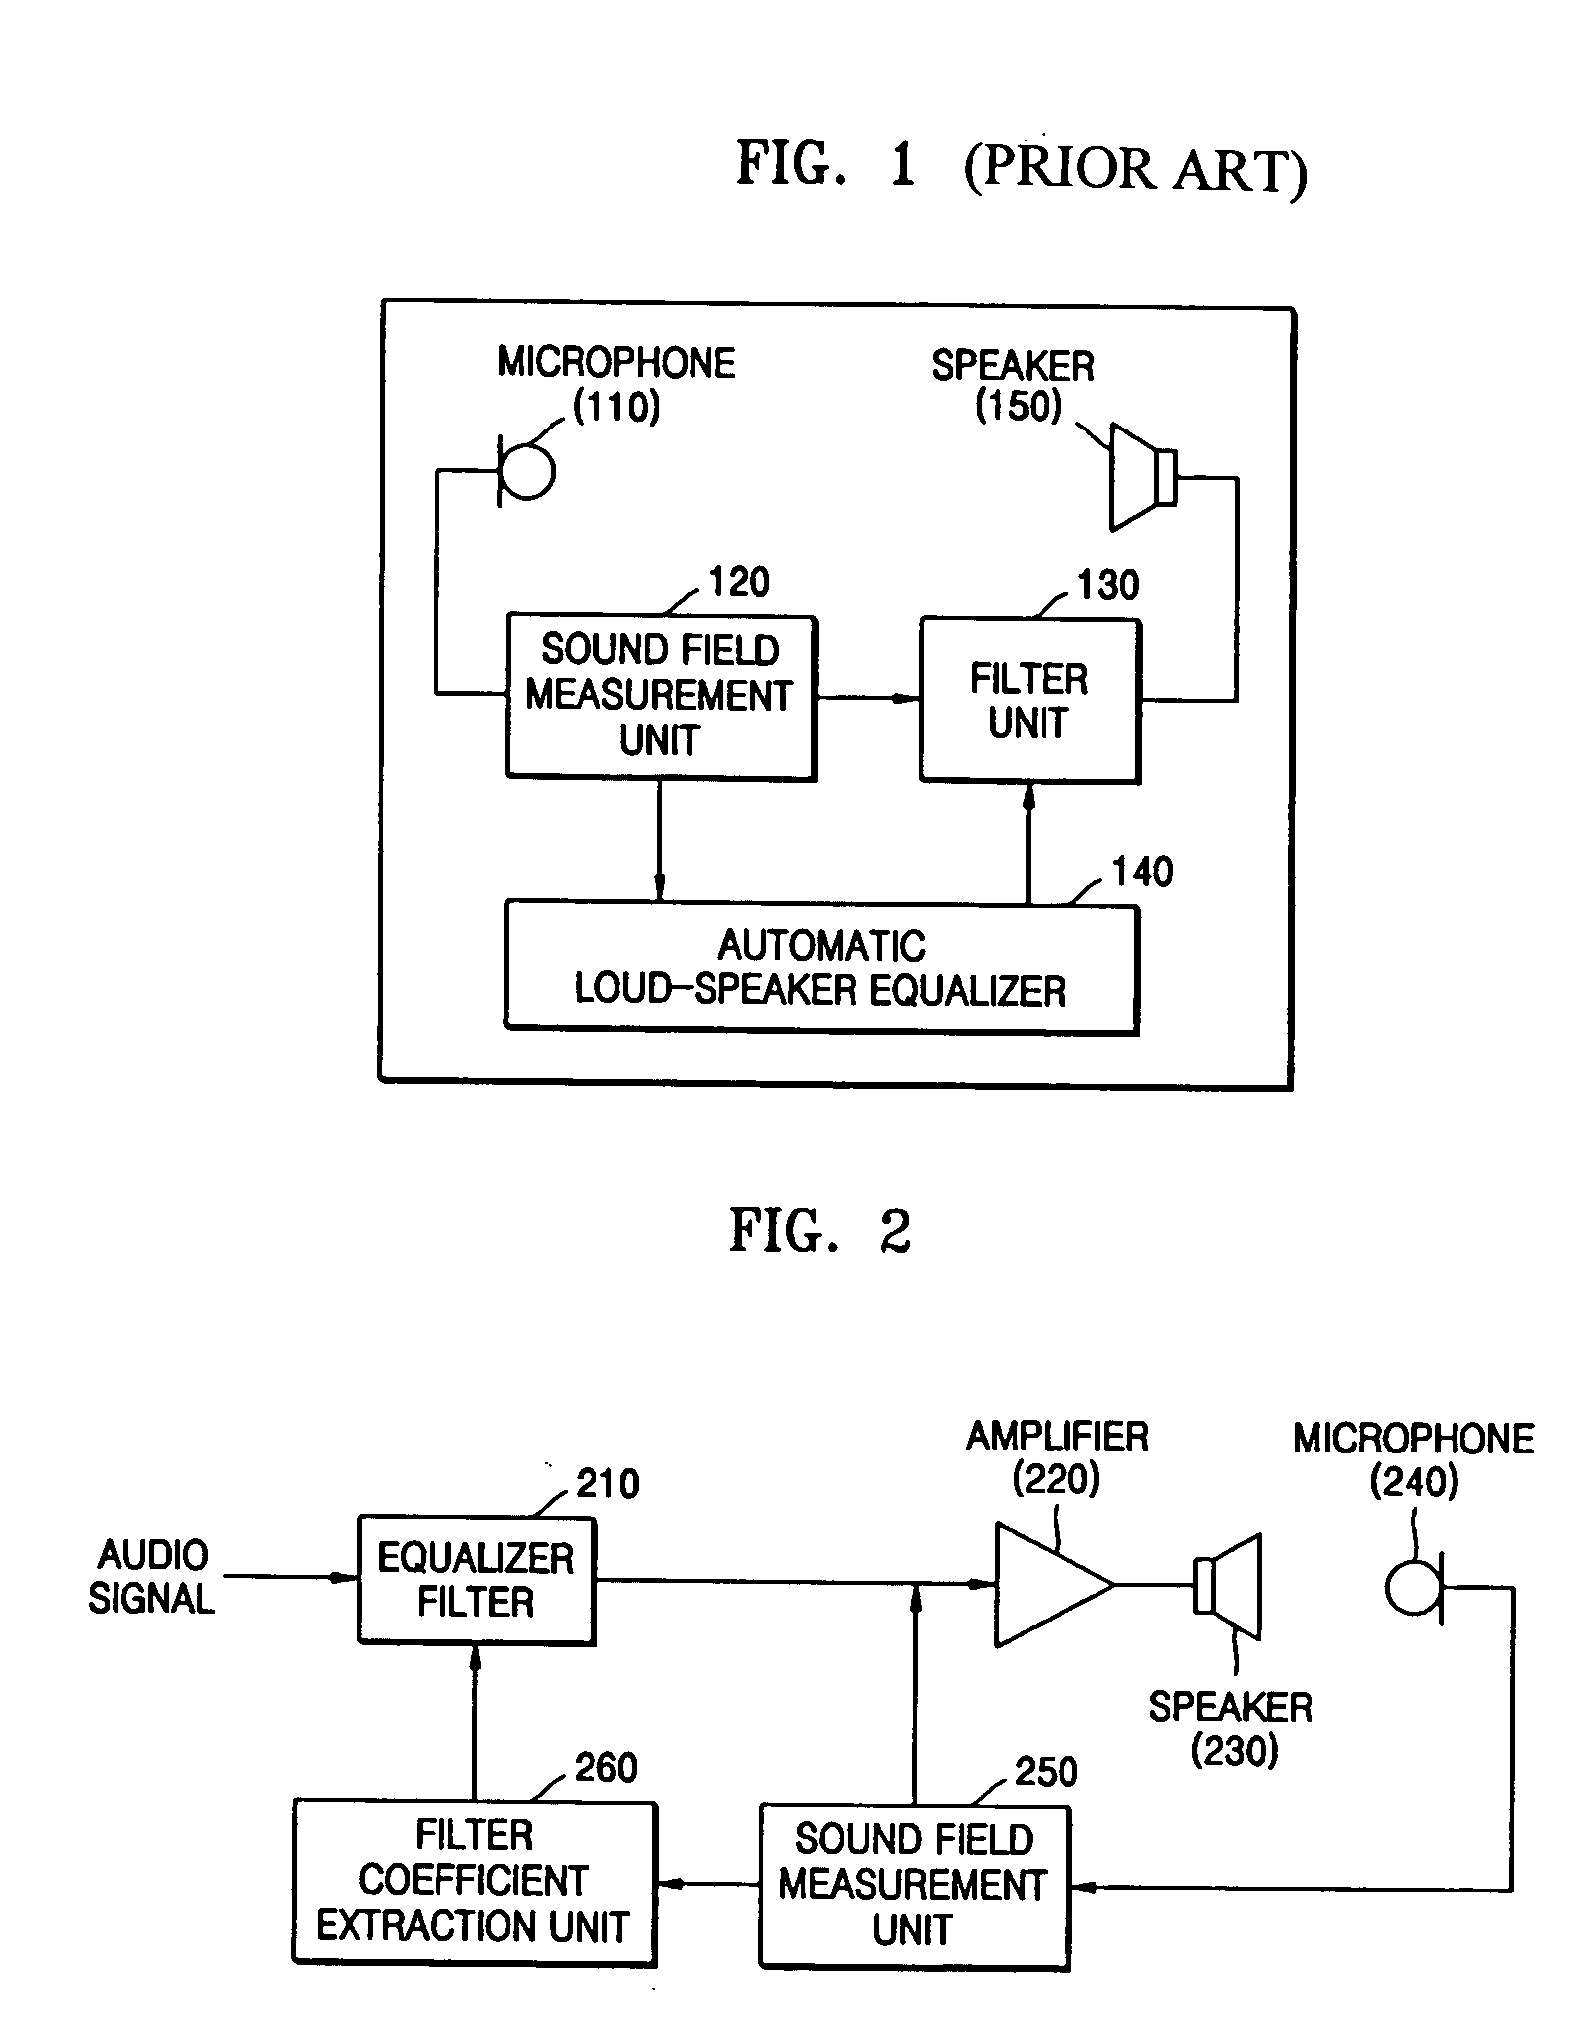 Method and apparatus to compensate for imperfections in sound field using peak and dip frequencies